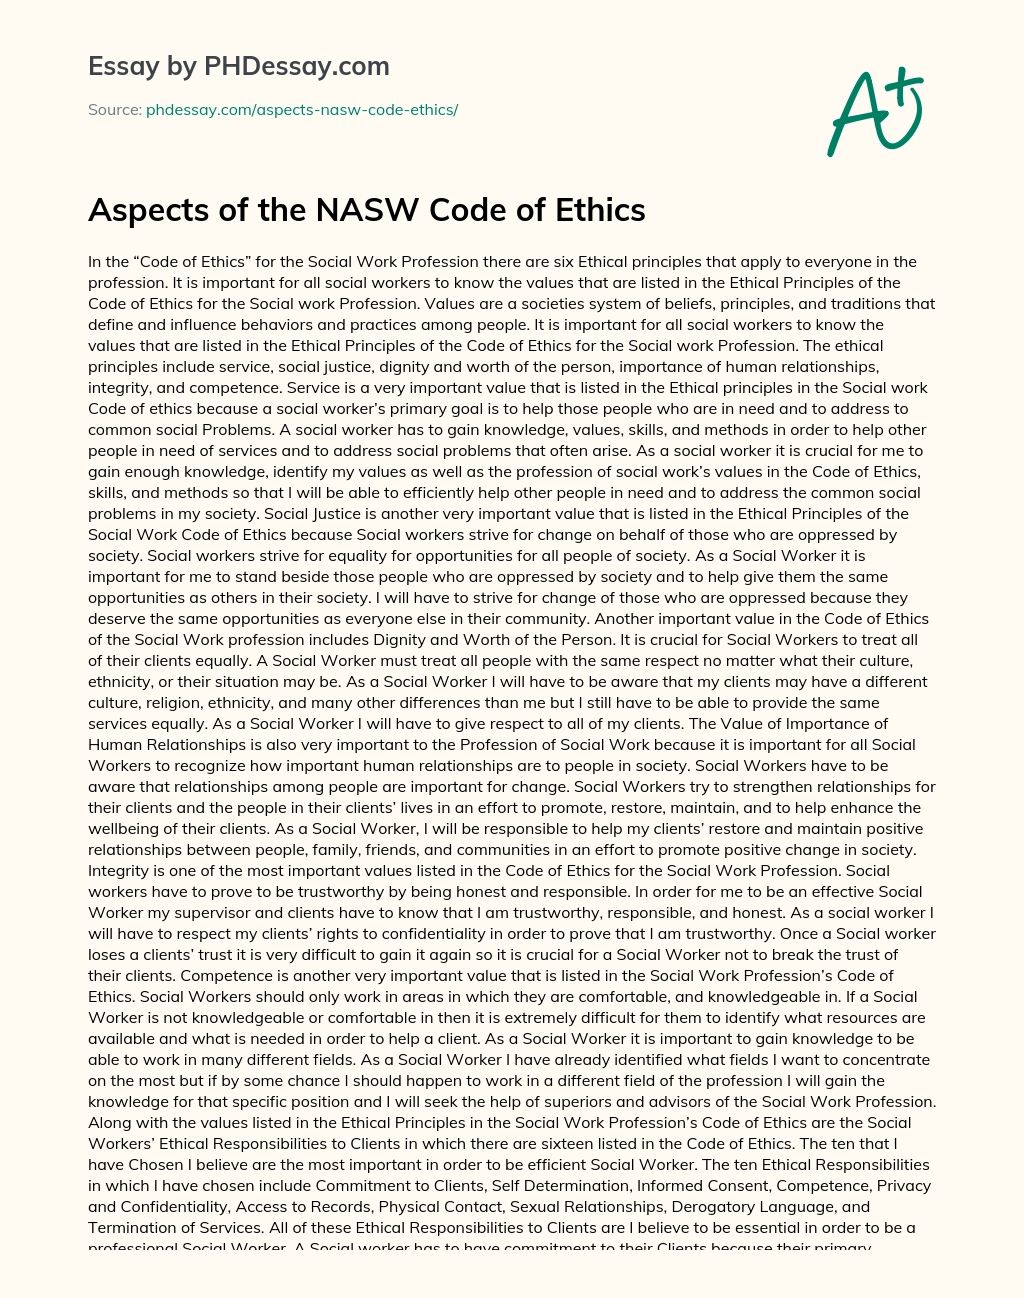 Aspects of the NASW Code of Ethics essay